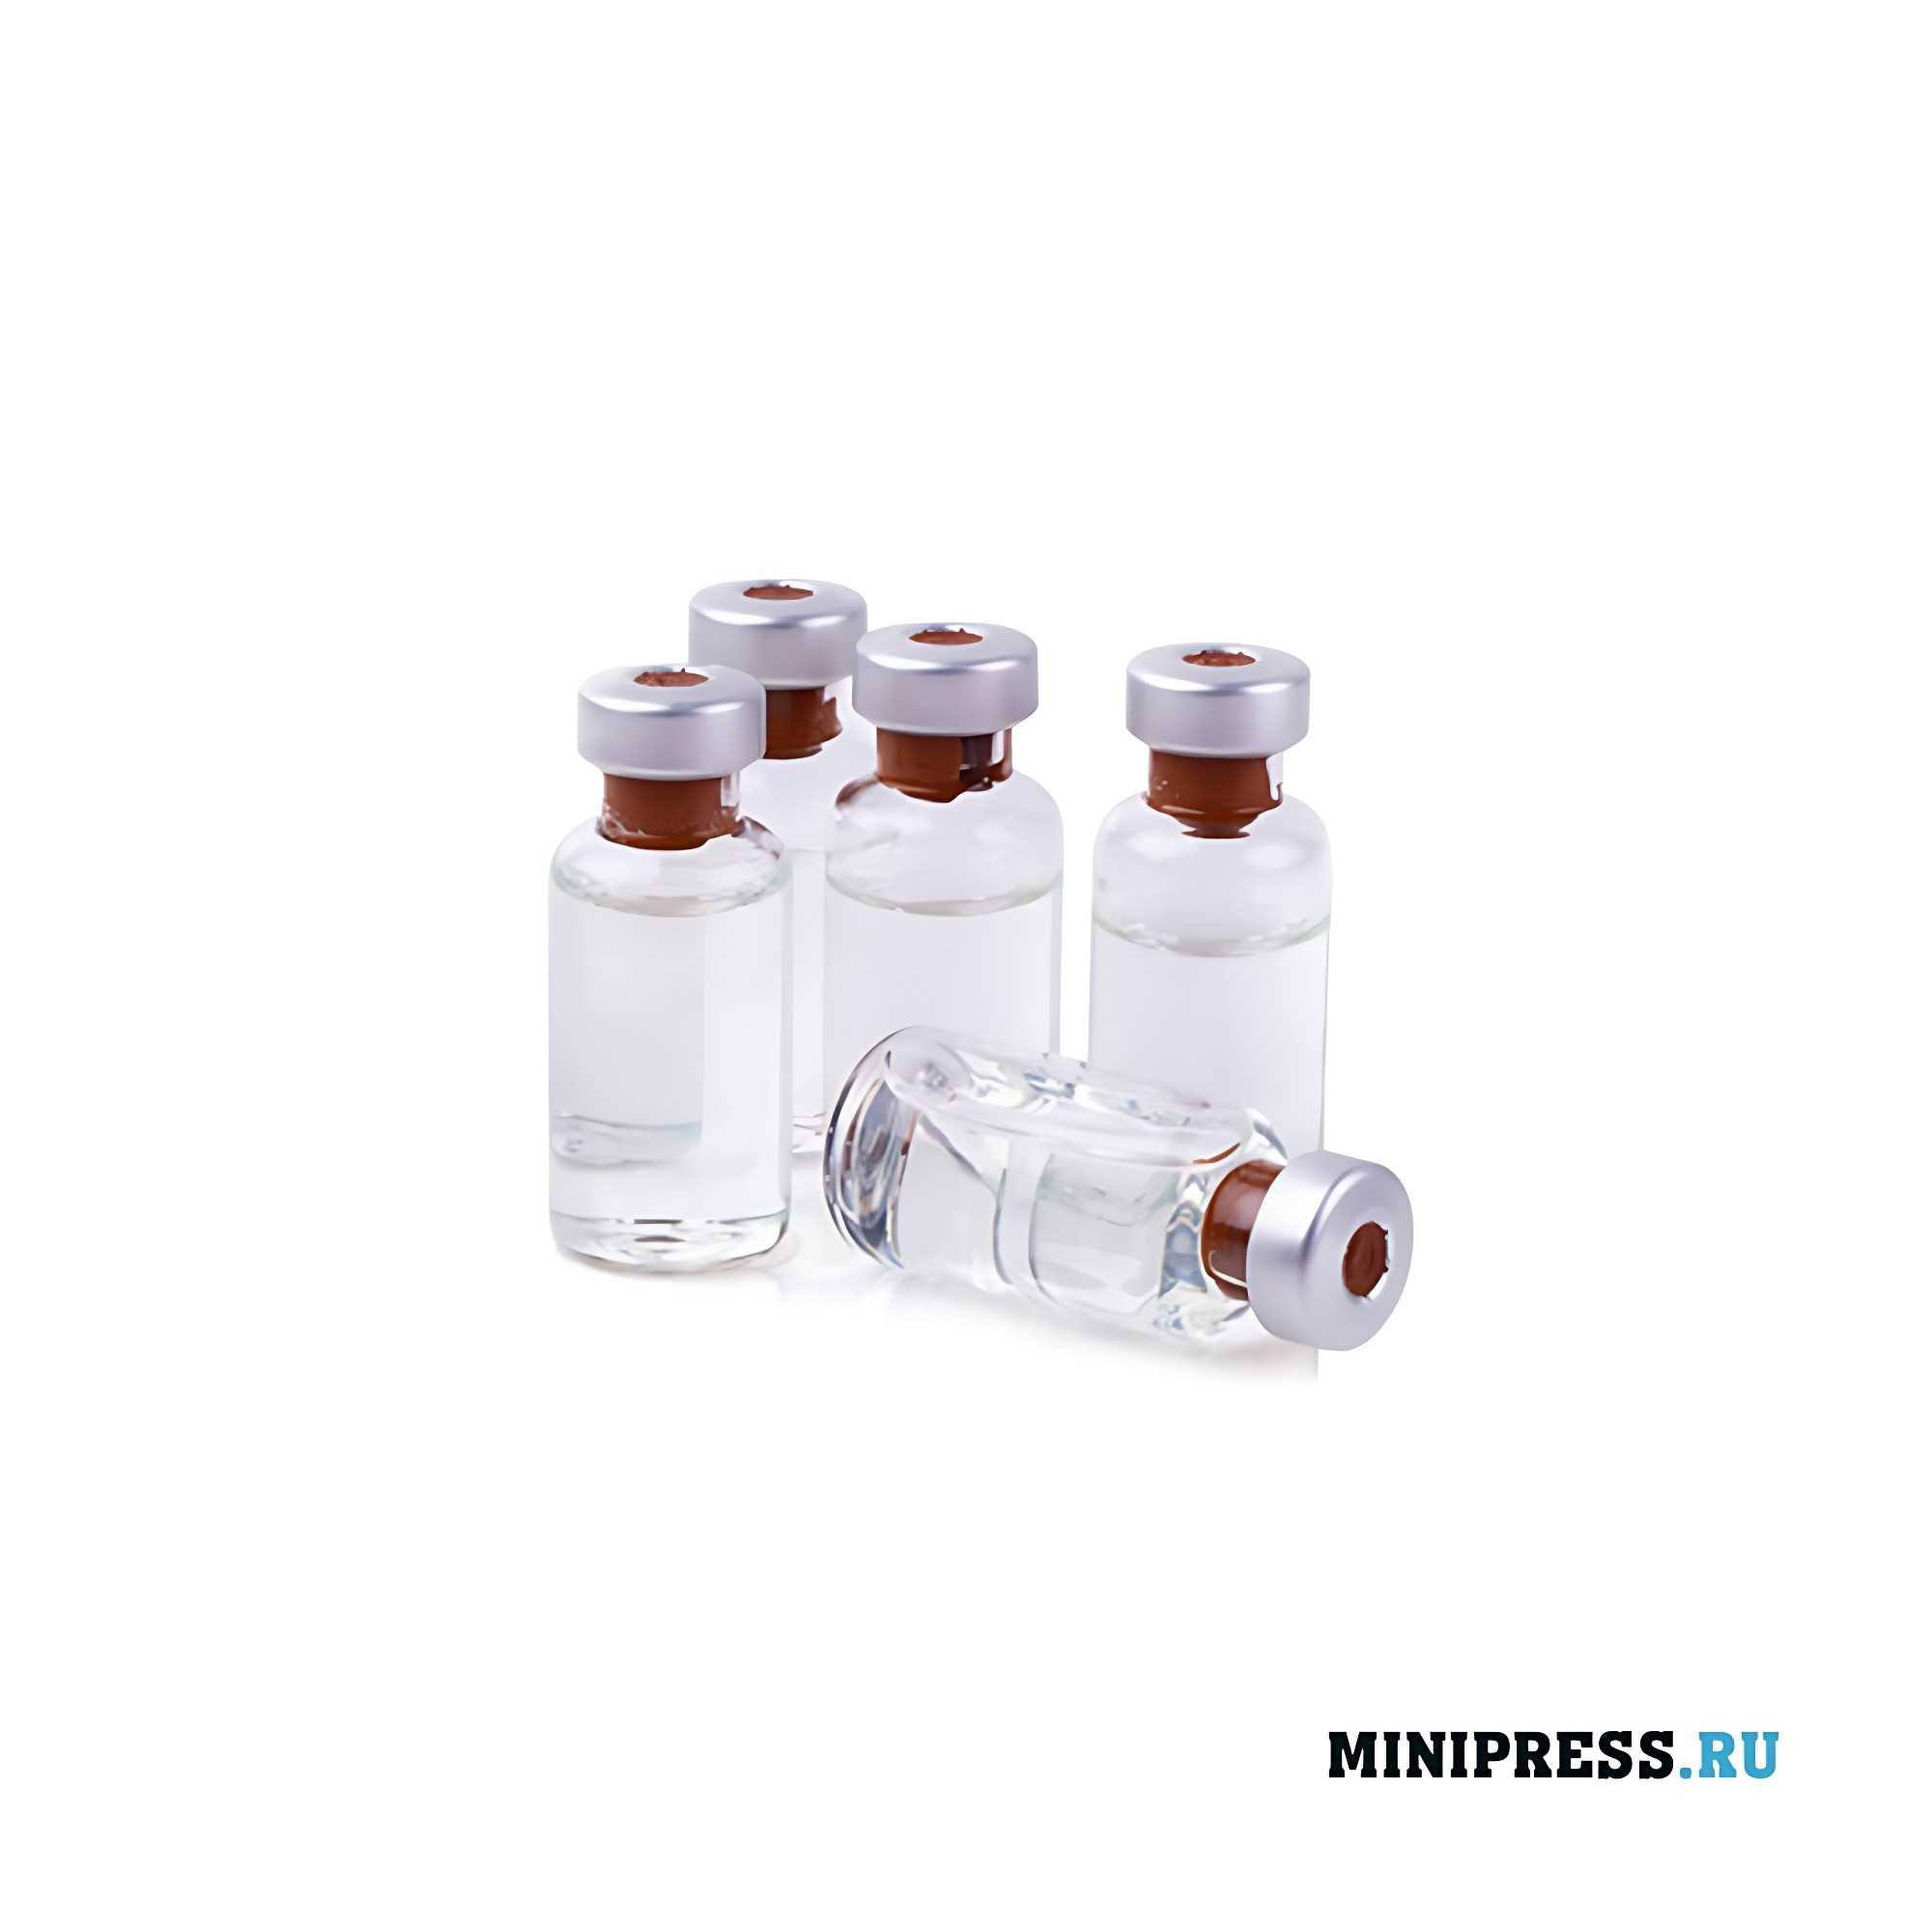 Equipment for filling antibiotics into glass vials of YFB 12